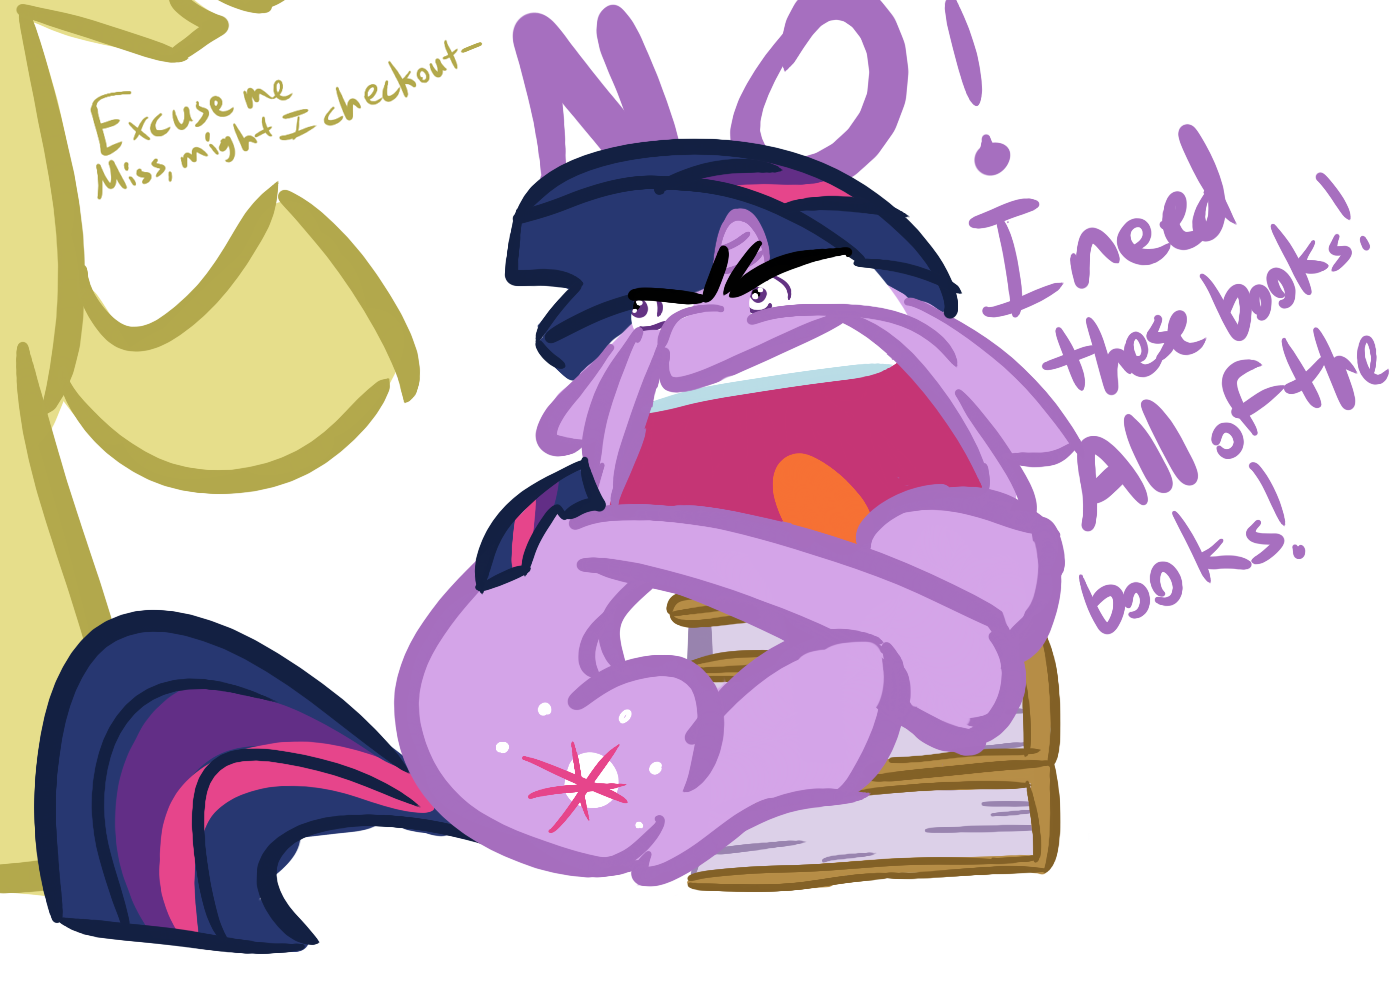 This is why we never see anypony rent a book.